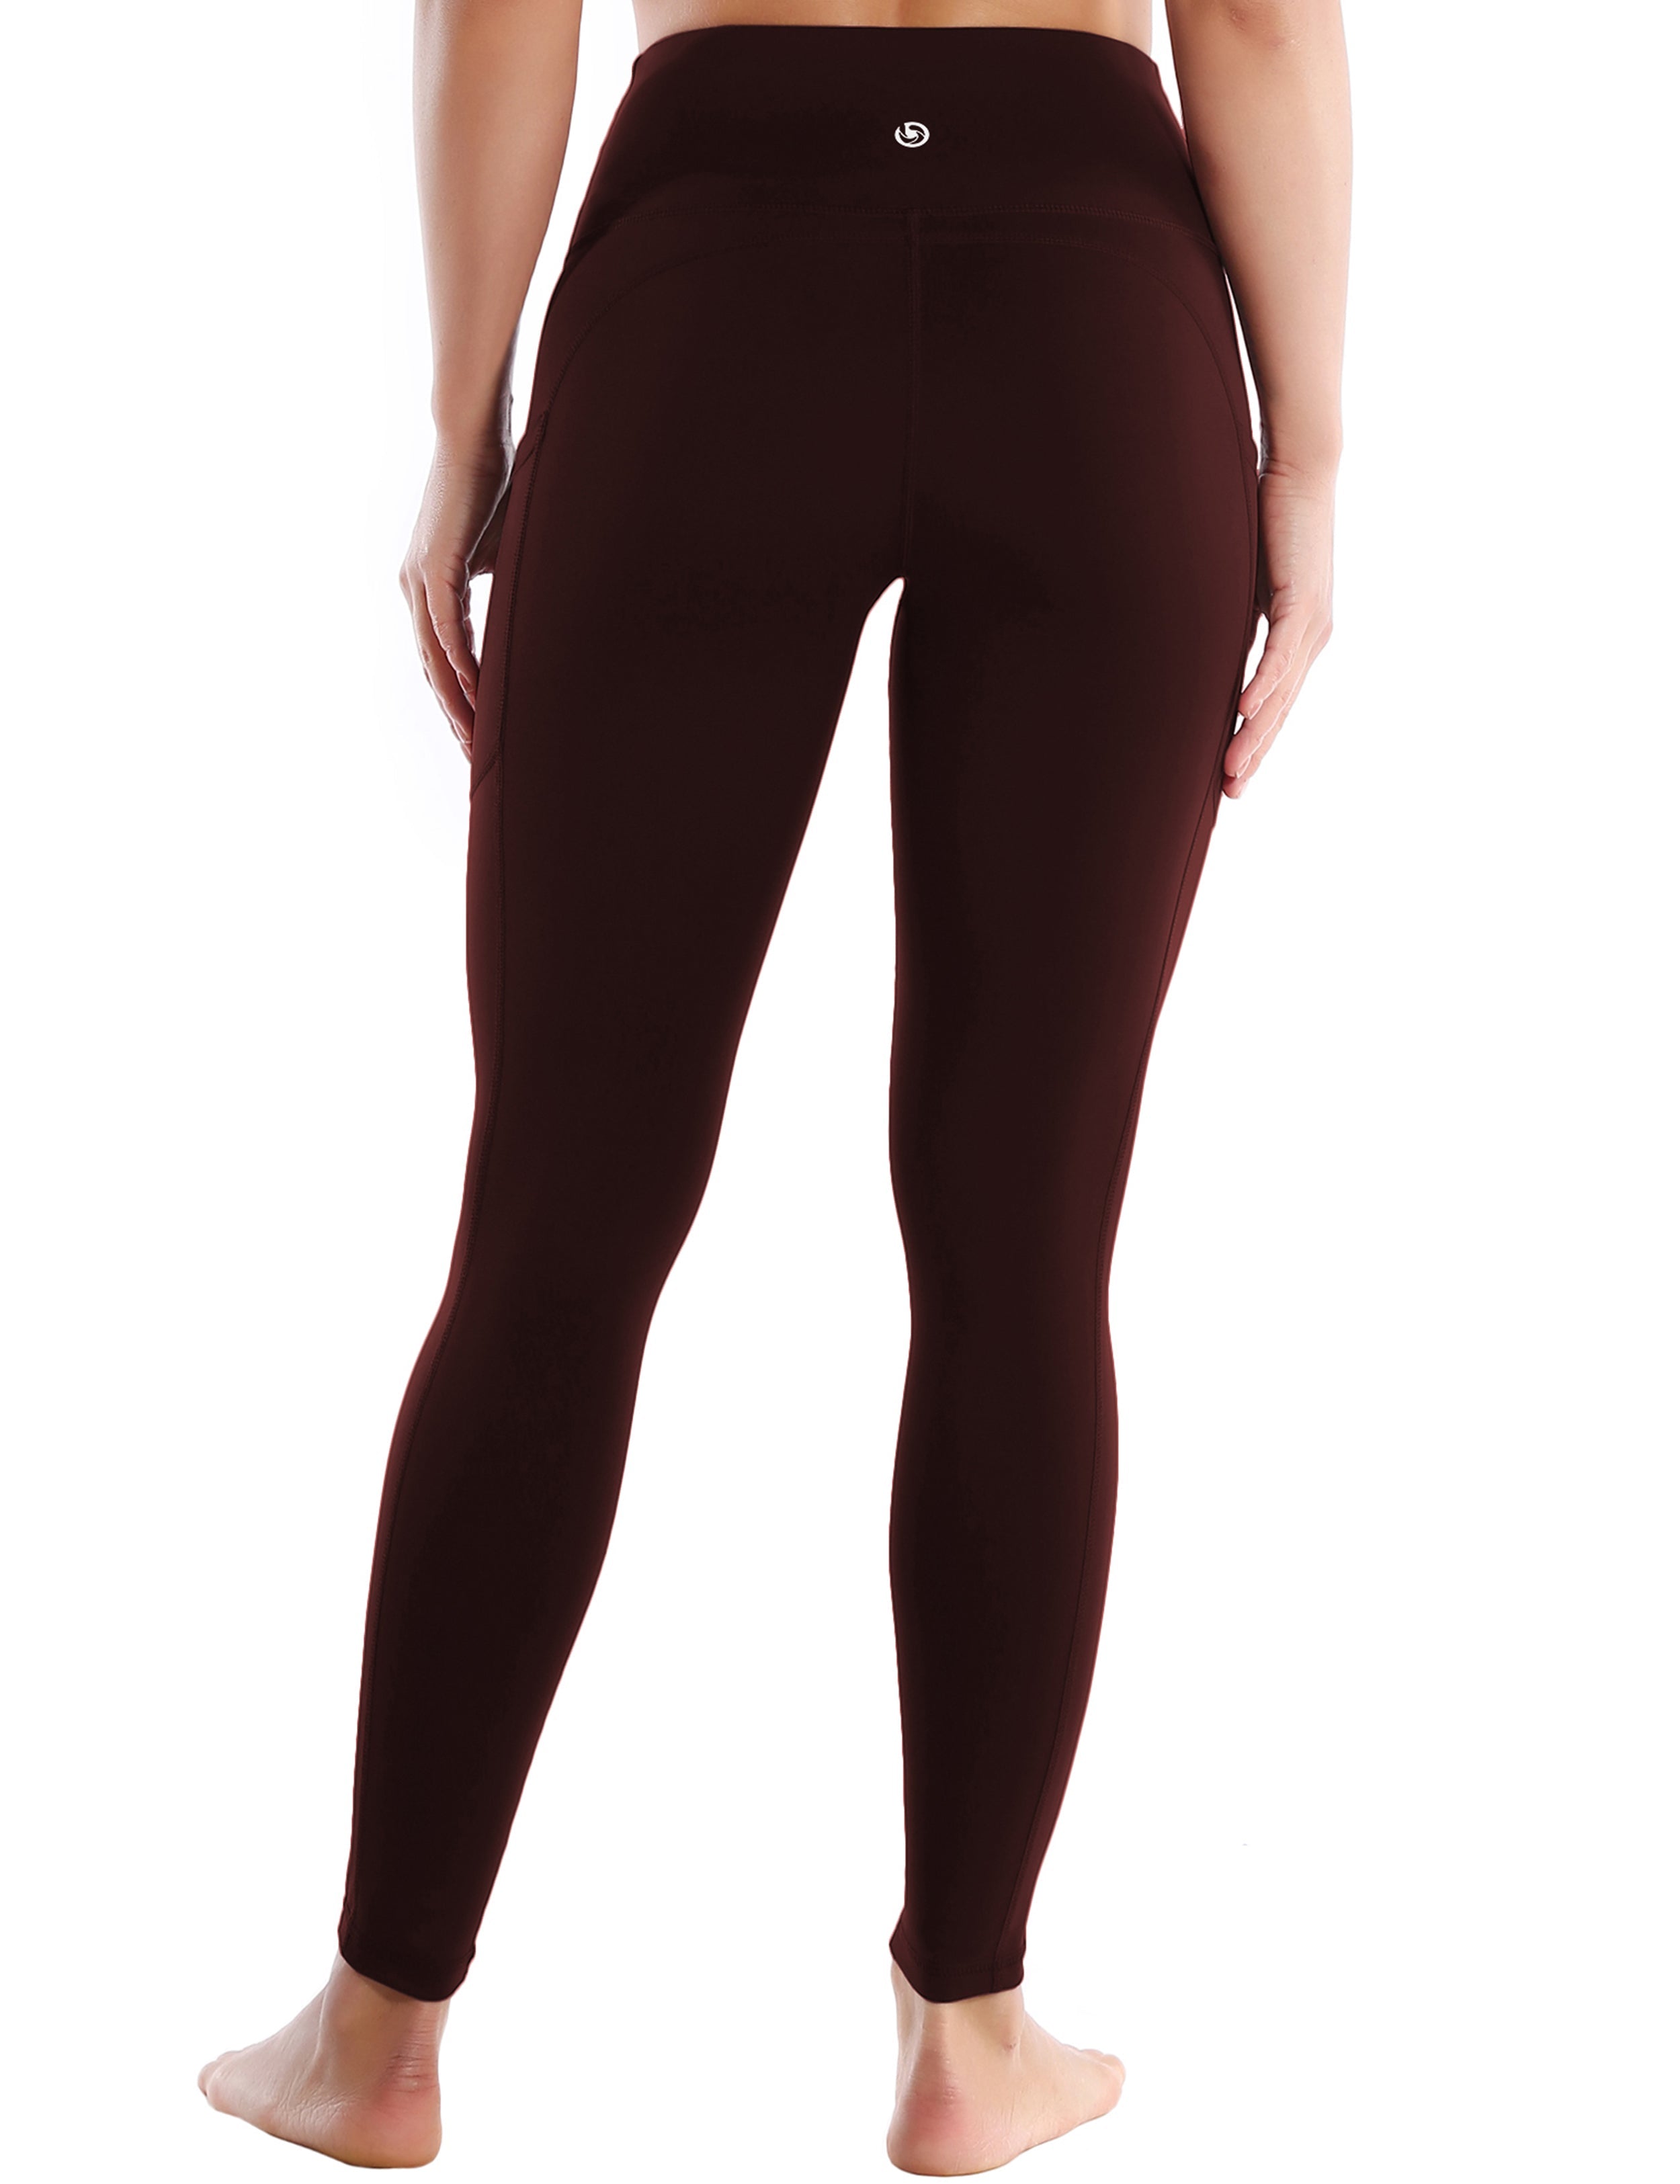 Hip Line Side Pockets Jogging Pants mahoganymaroon Sexy Hip Line Side Pockets 75%Nylon/25%Spandex Fabric doesn't attract lint easily 4-way stretch No see-through Moisture-wicking Tummy control Inner pocket Two lengths